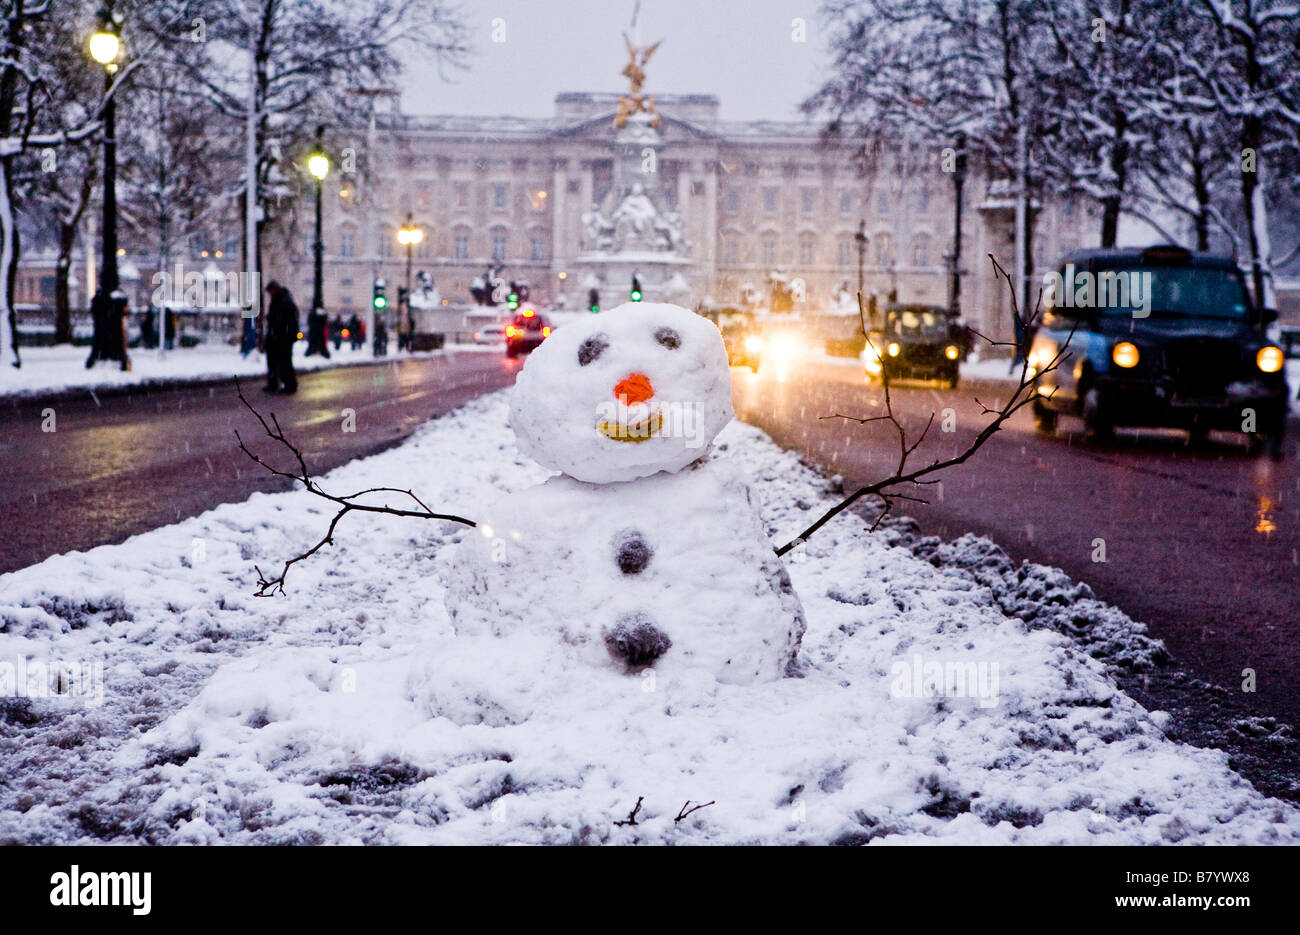 Snowman In The Mall London  UK Europe Stock Photo